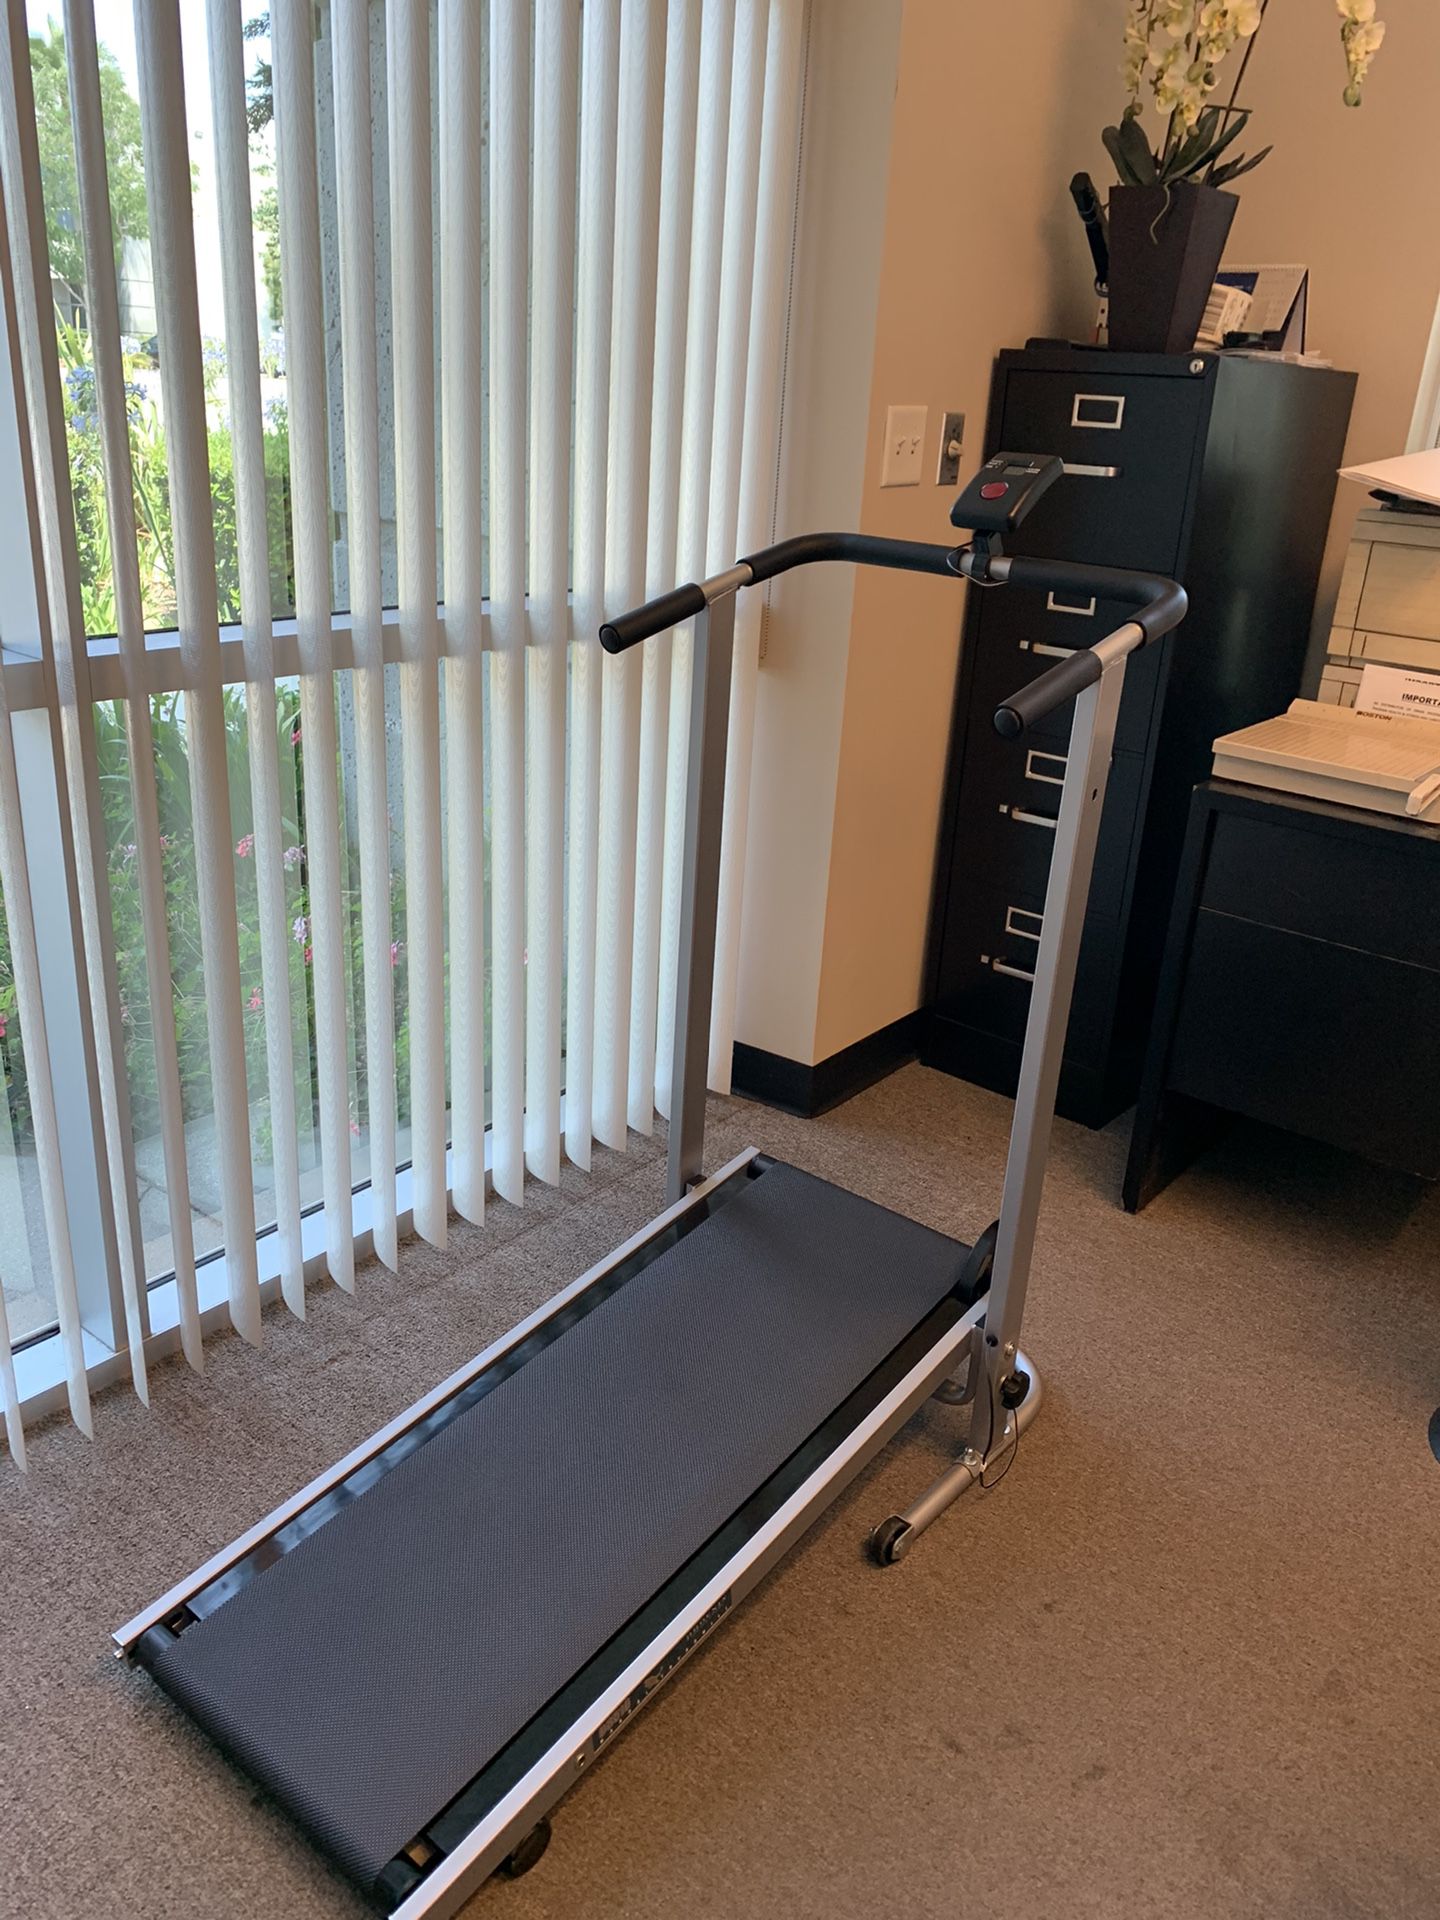 Manual Treadmill with folding feature for space saver  “New “